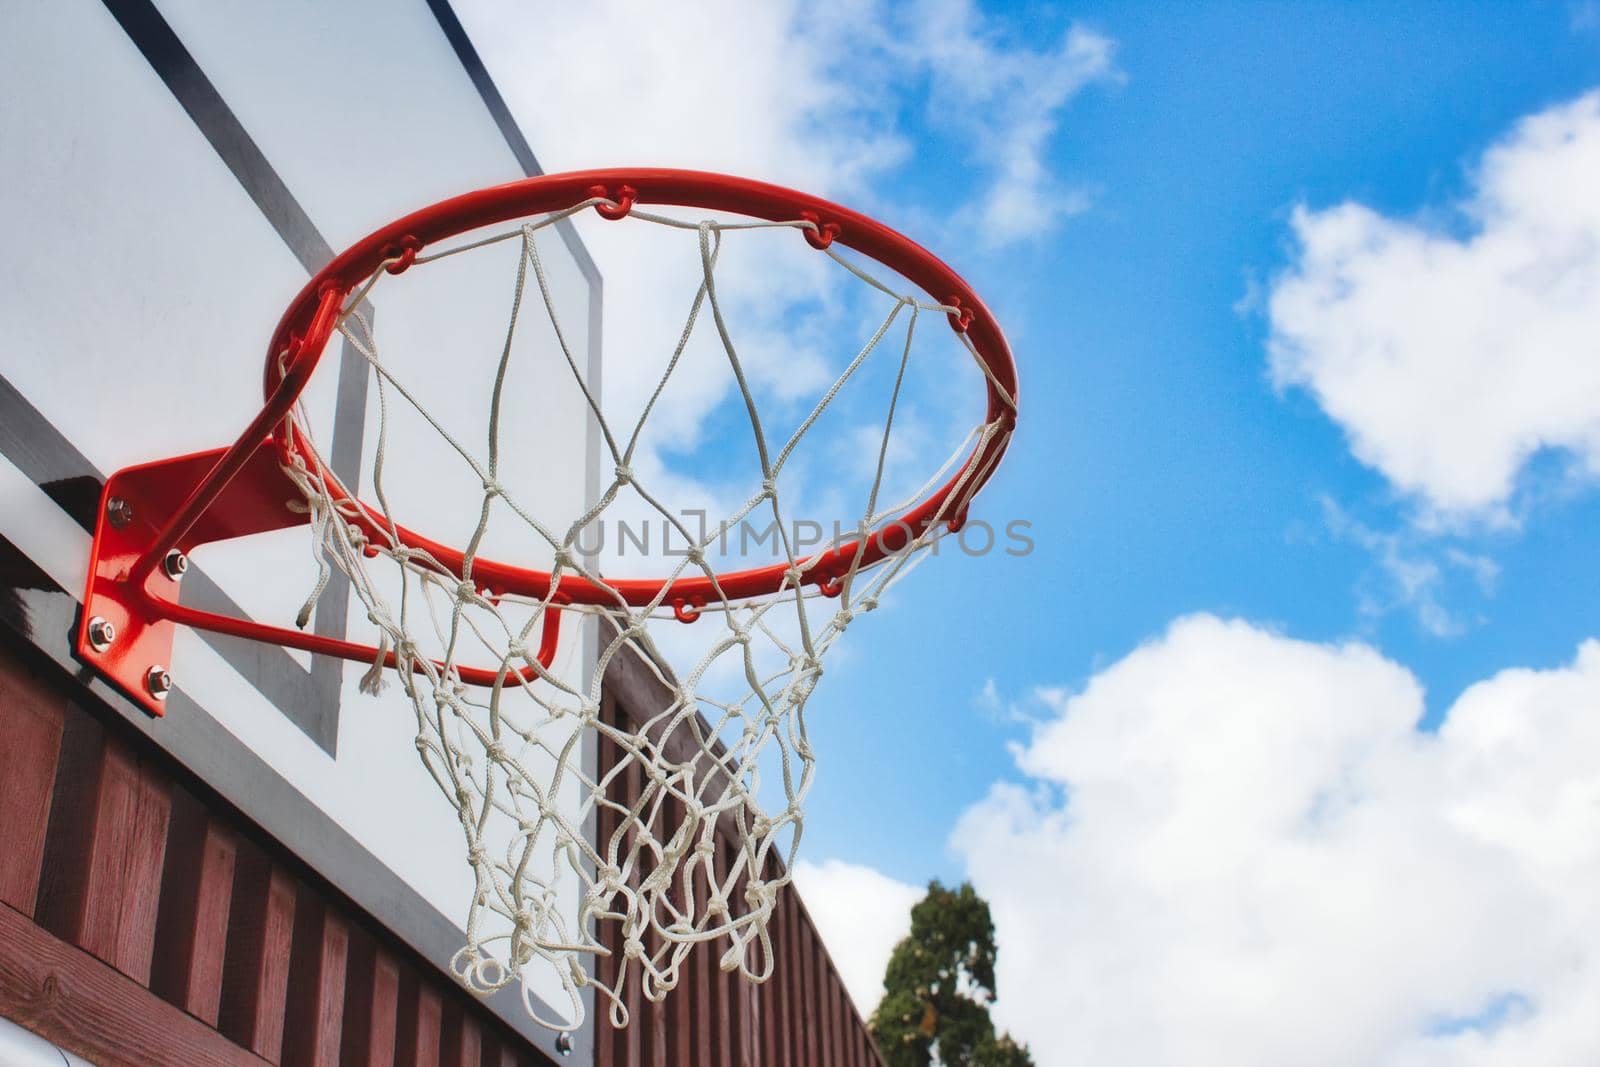 Basketball hoop with netting from underneath with a blue sky background